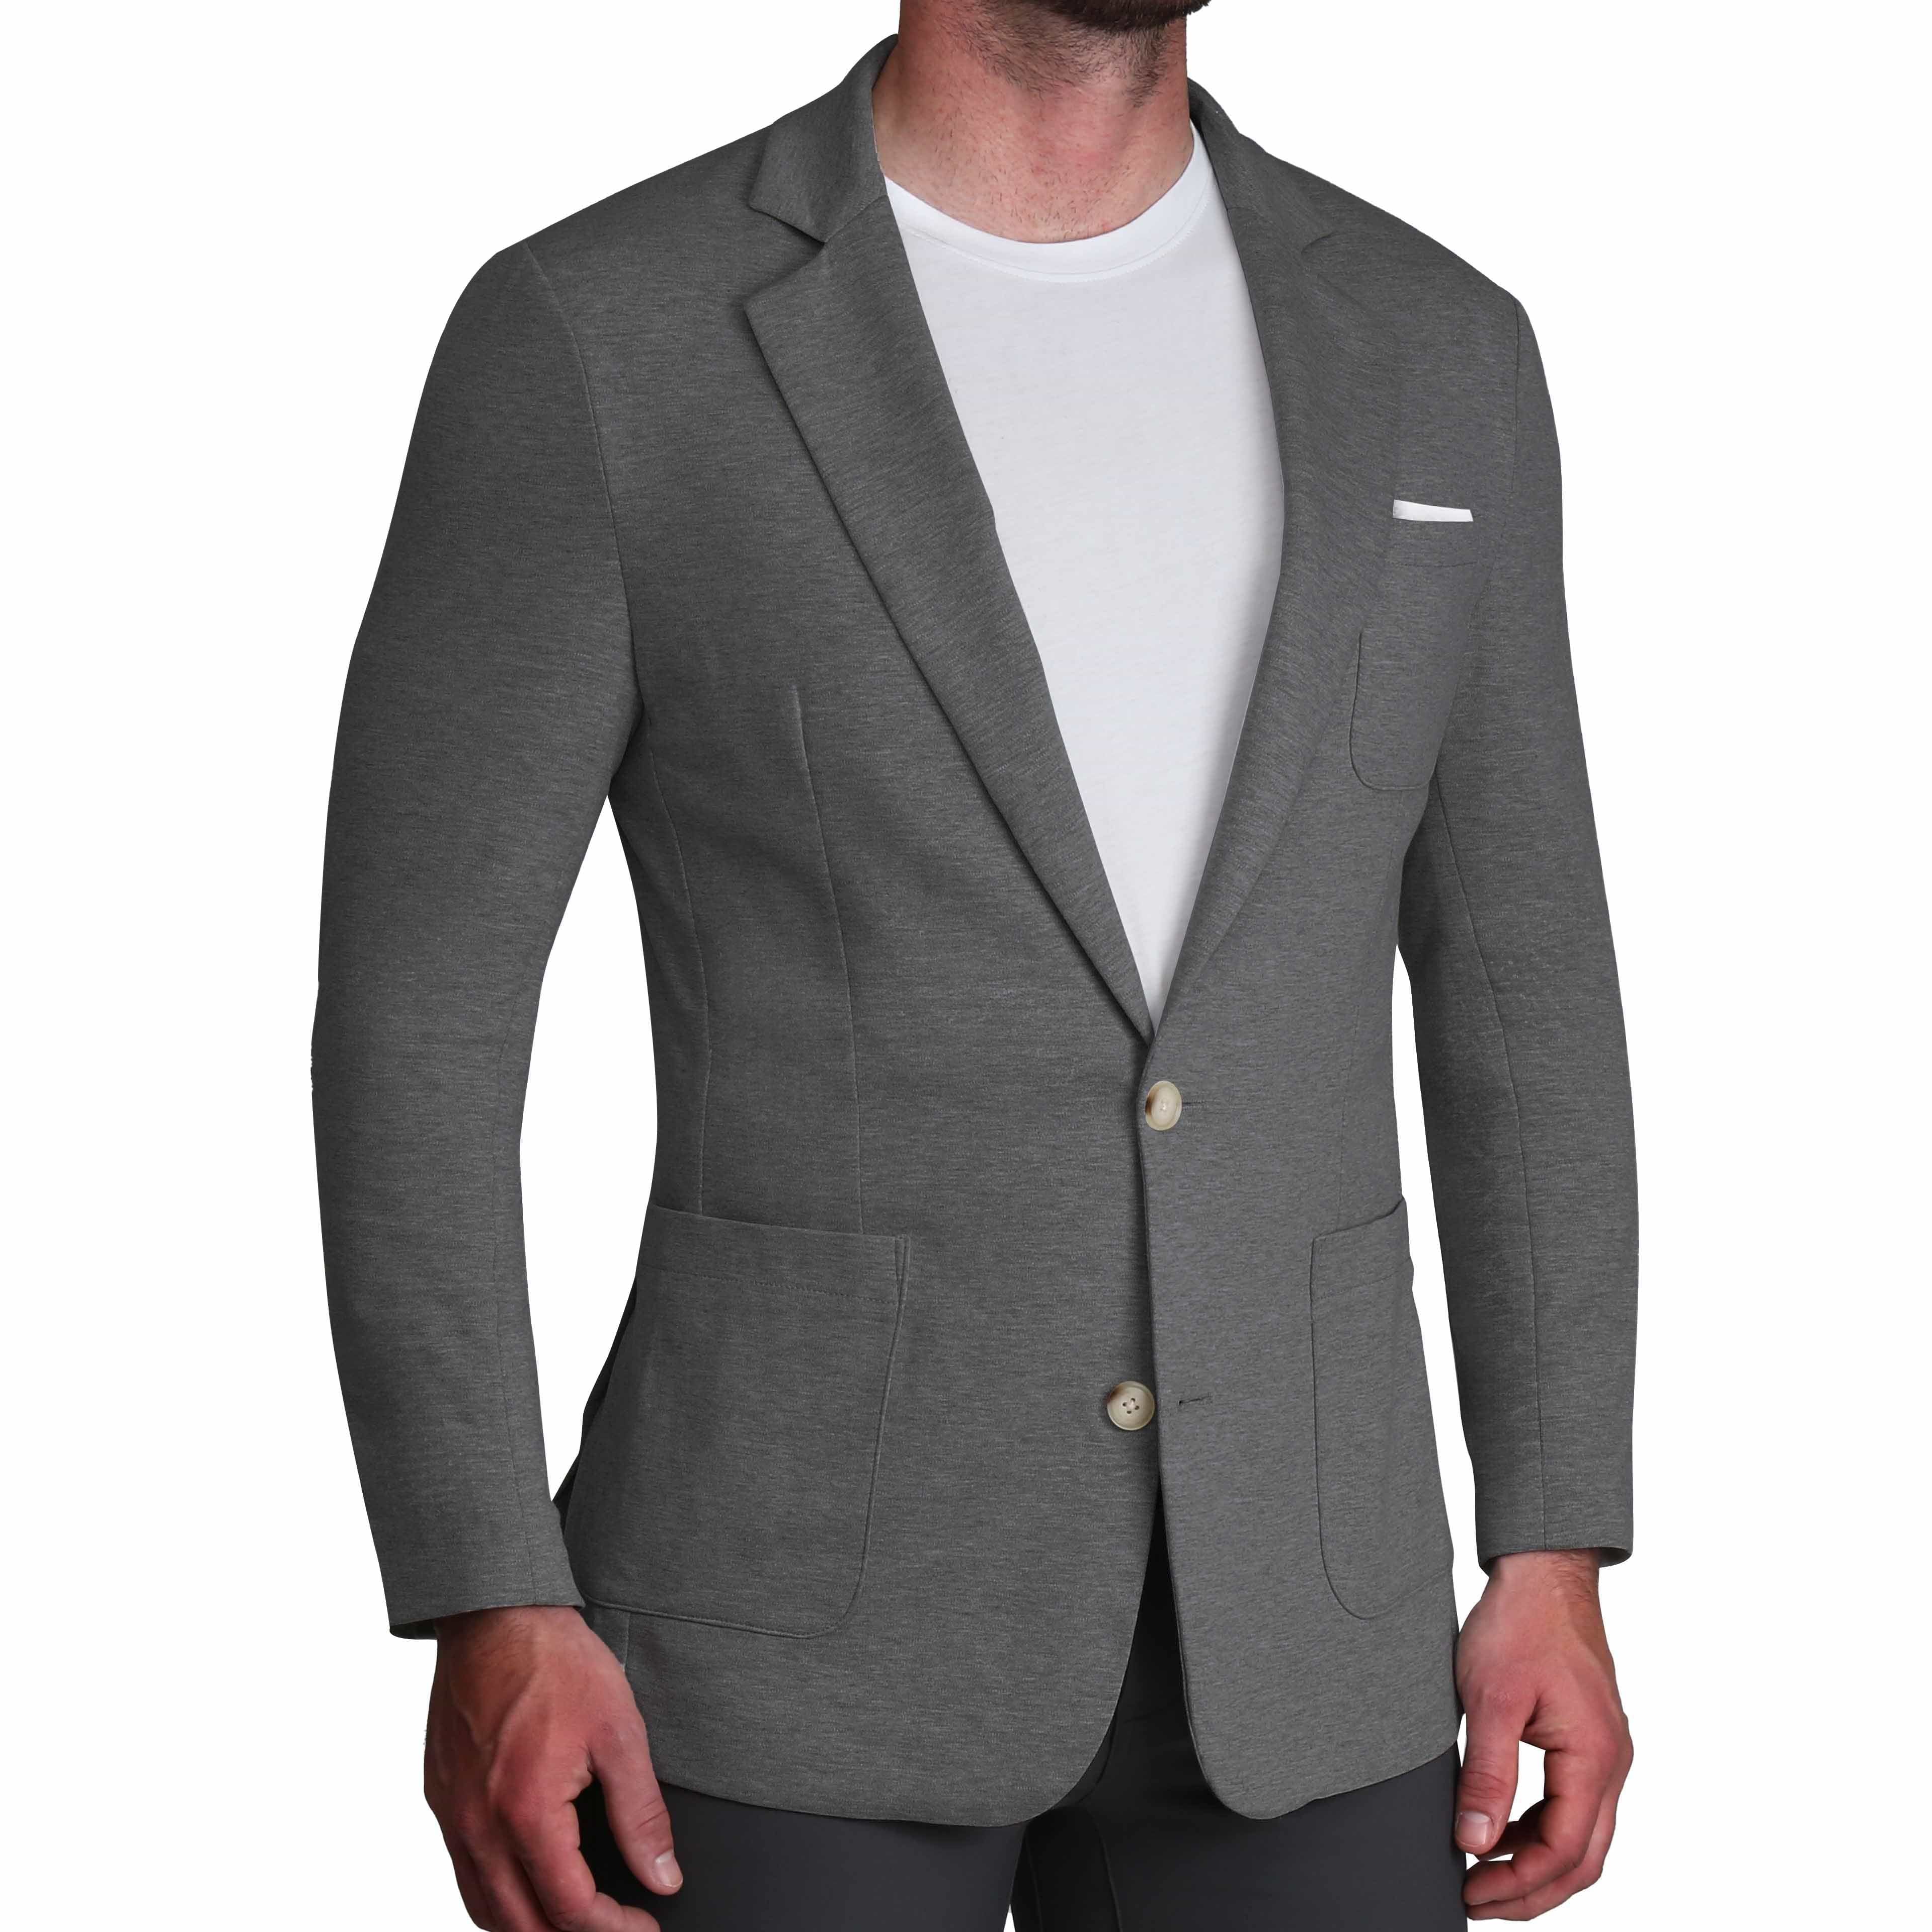 Unstructured Knit Blazer - Heathered Charcoal